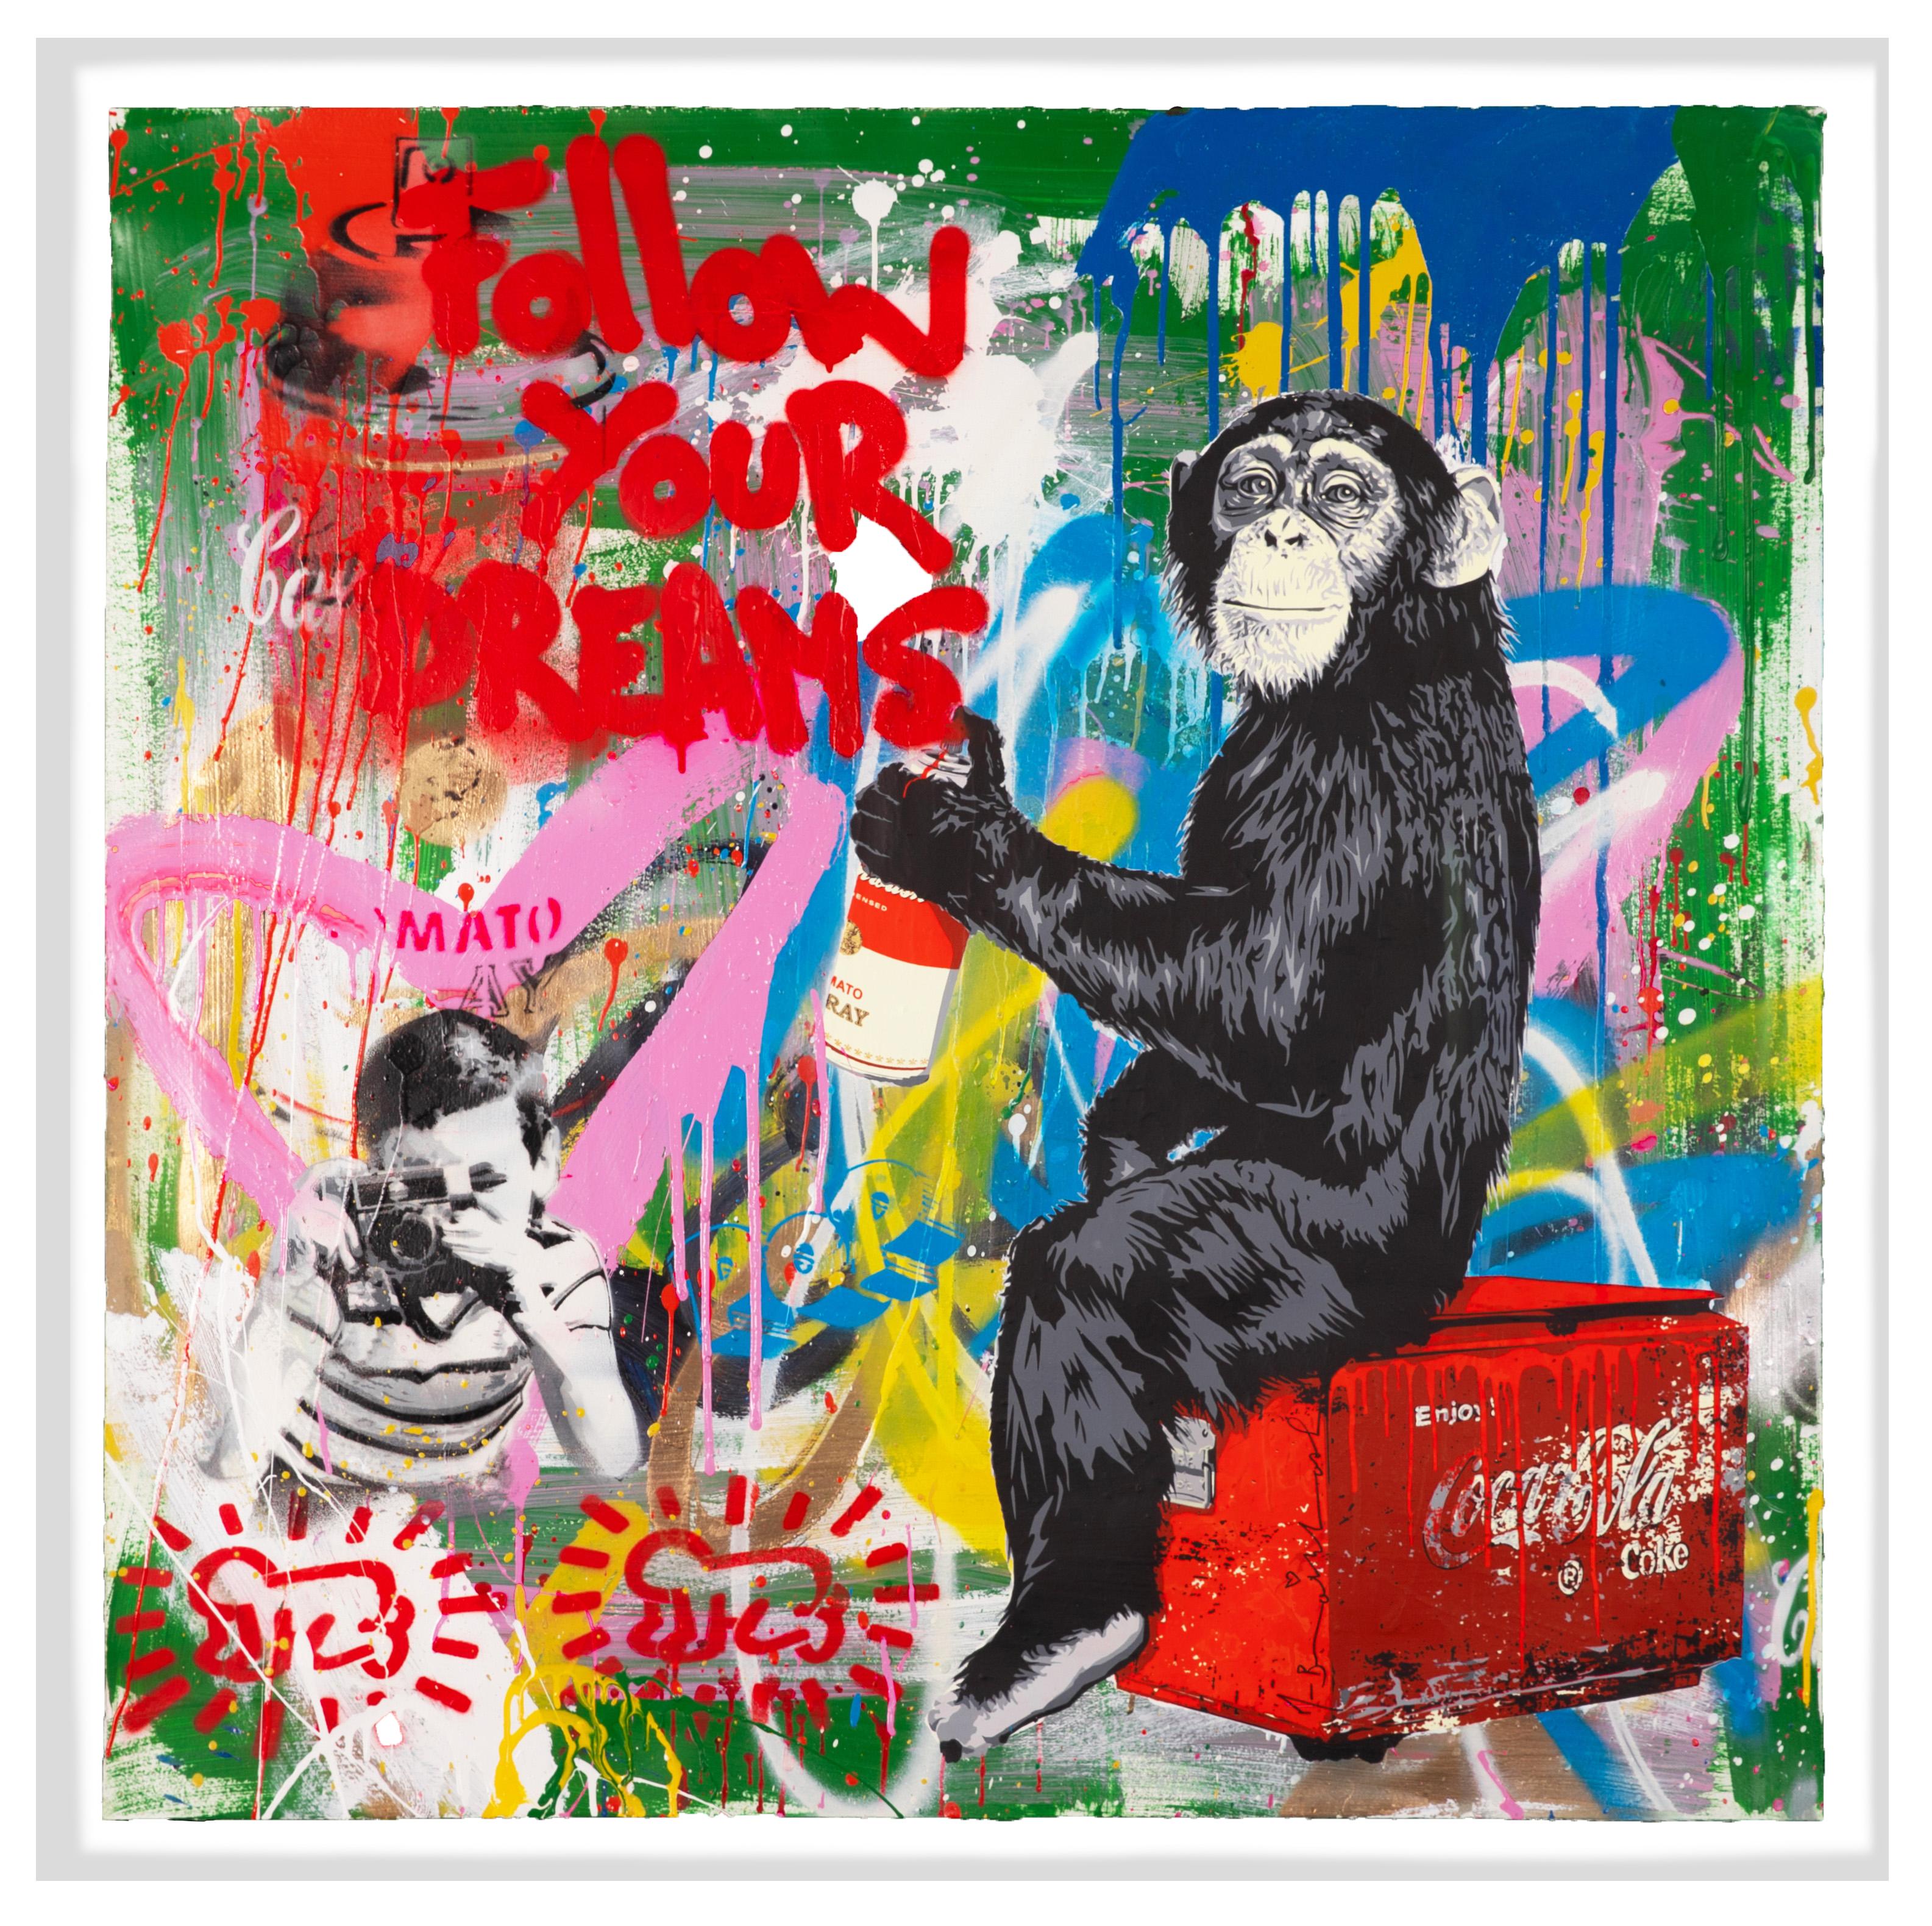 'Follow Your Dreams Monkey' Pop Art Collage Painting, 2020